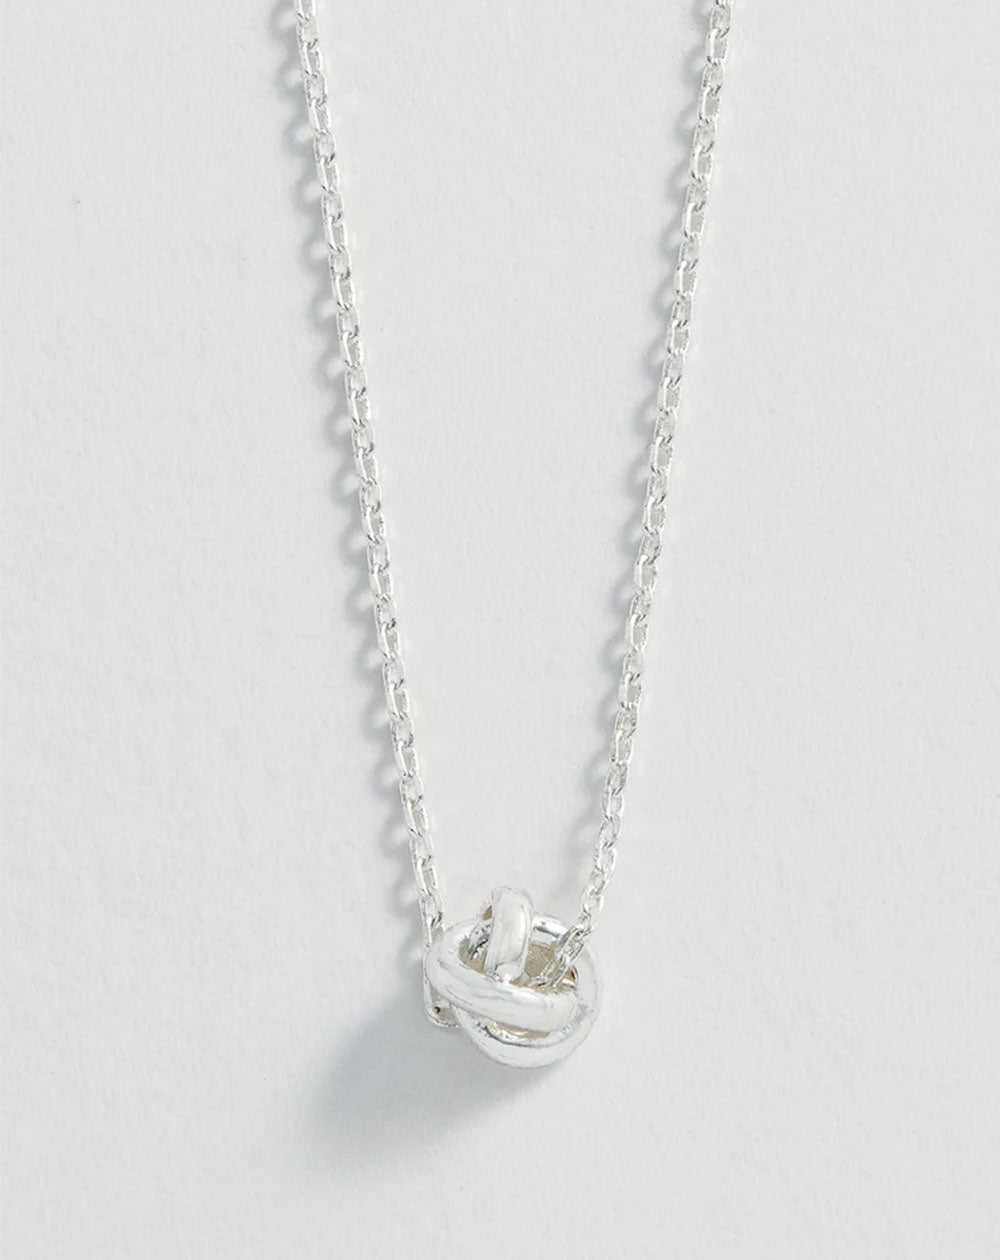 Estella Bartlett - Knot Charm Necklace - Silver Plated